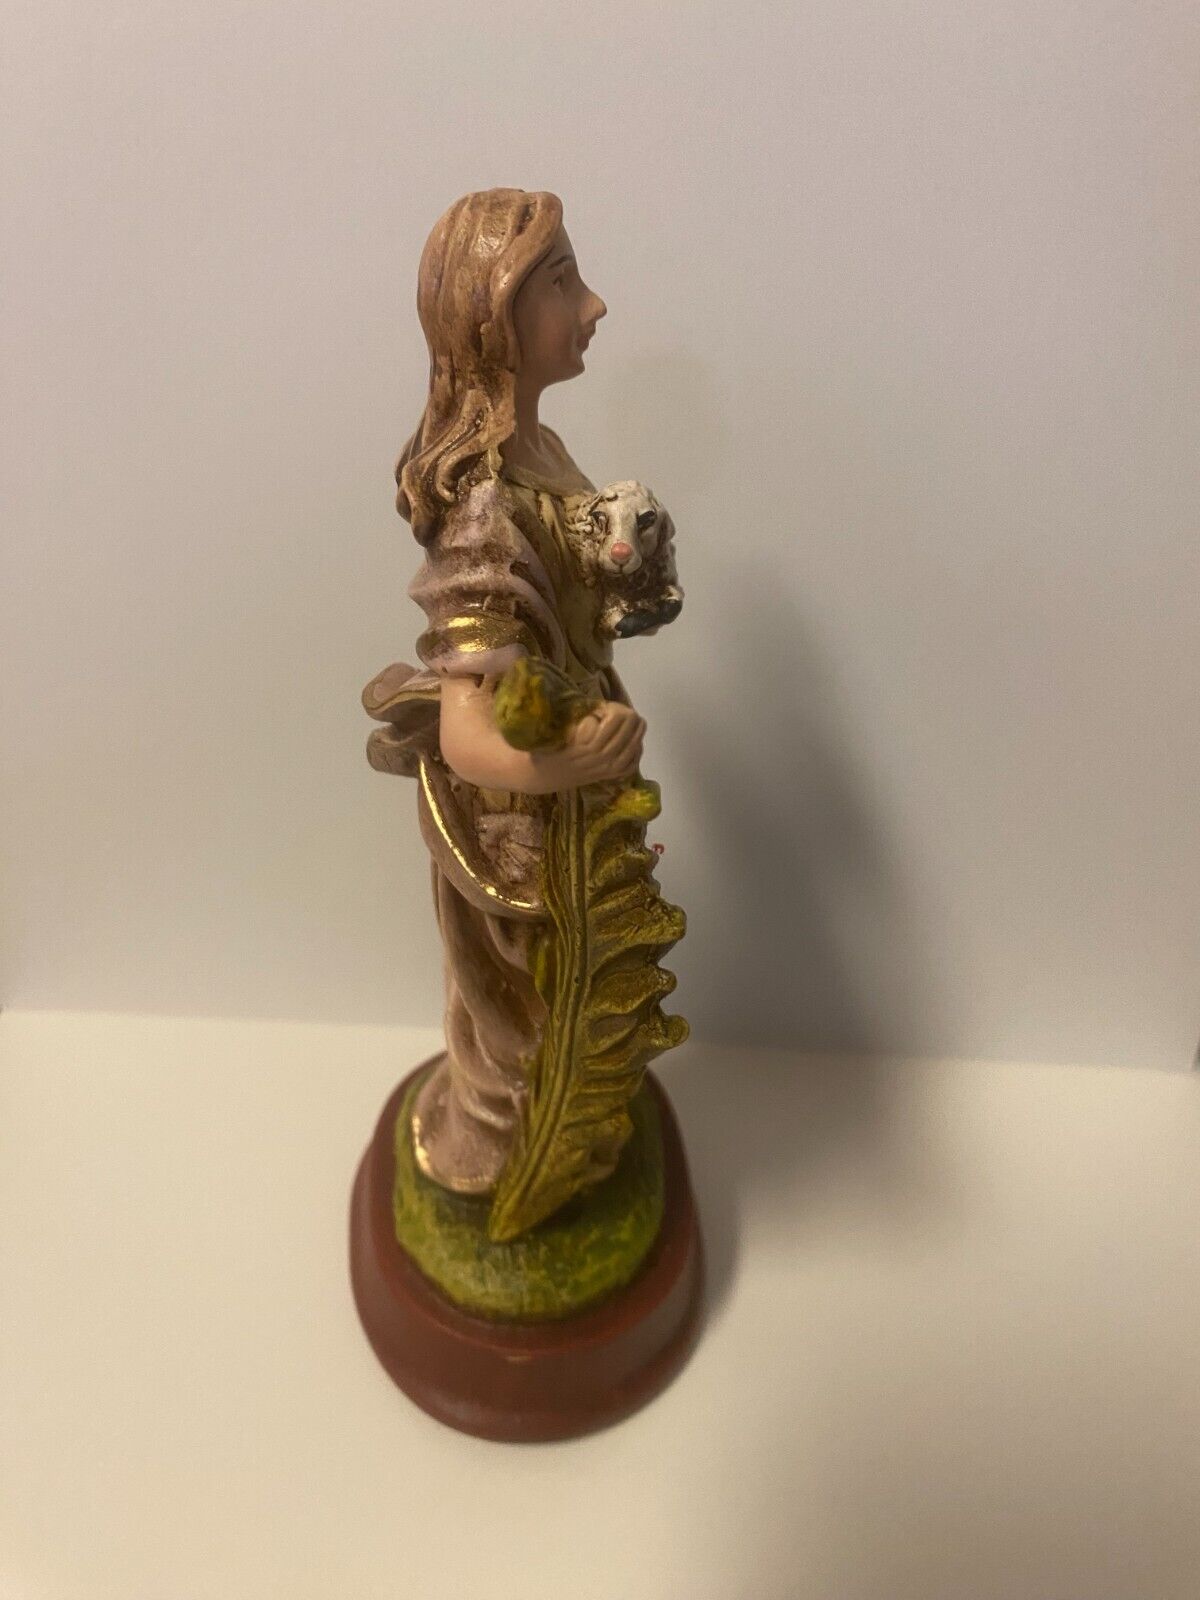 Saint Agnes 5.5" Statue, New From Colombia